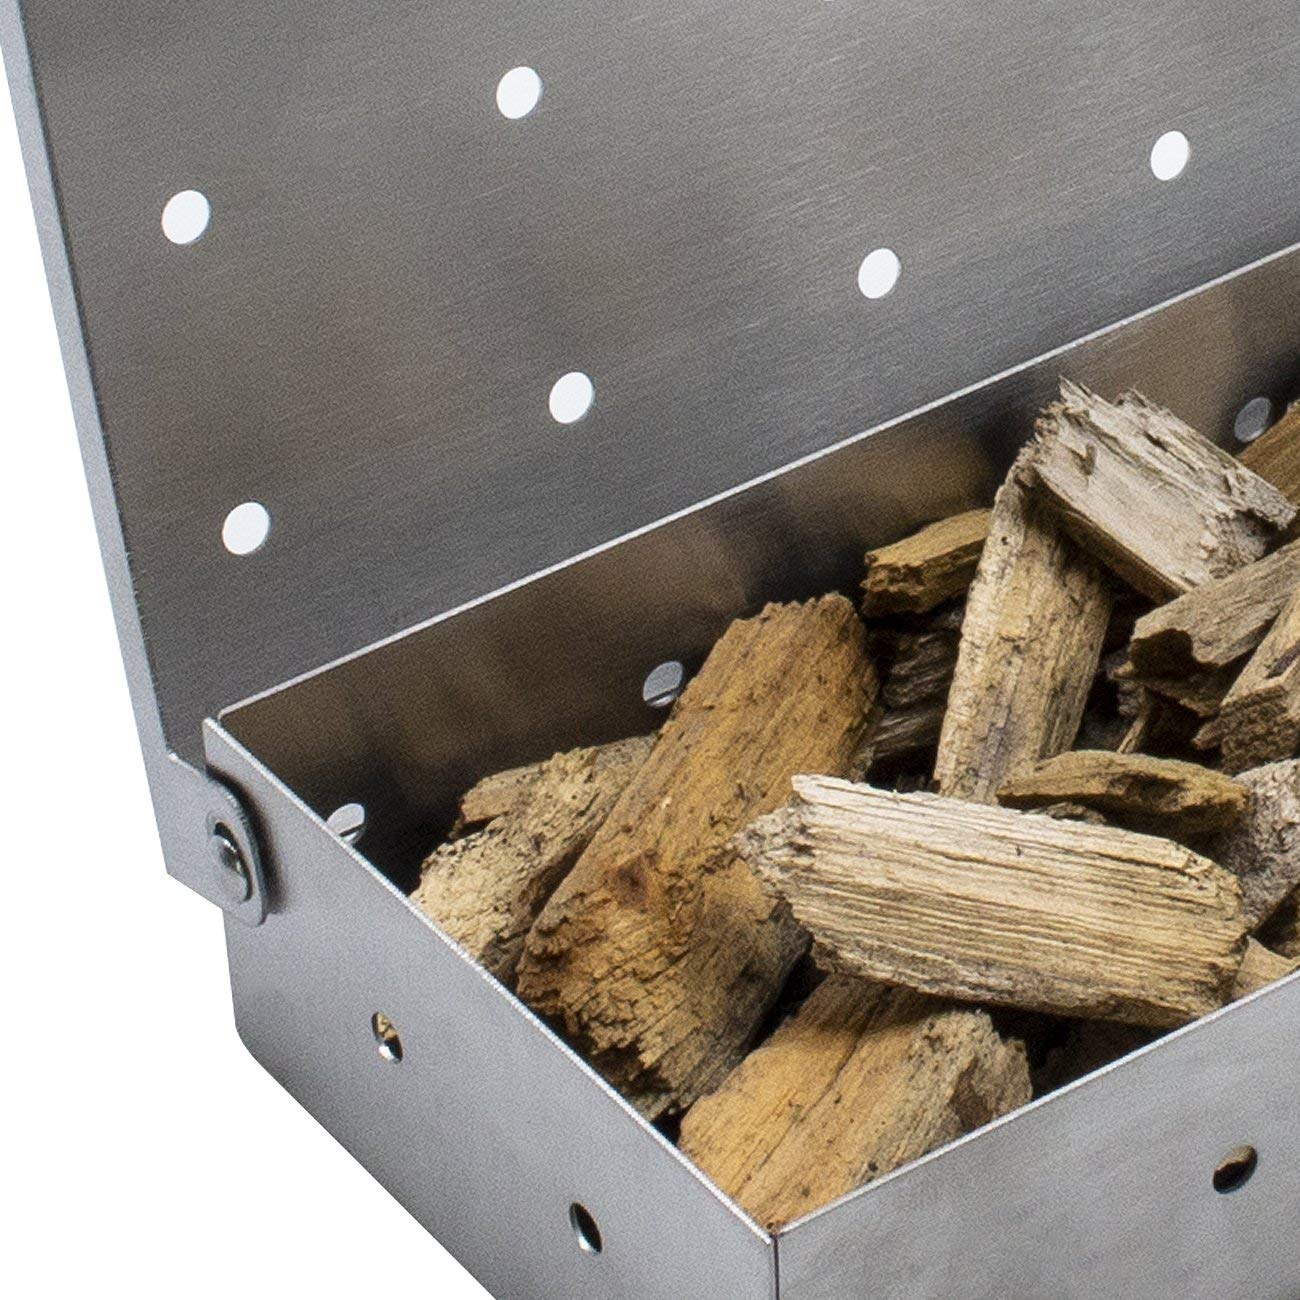 Smoker Box for Wood Chips - Sorbus Home